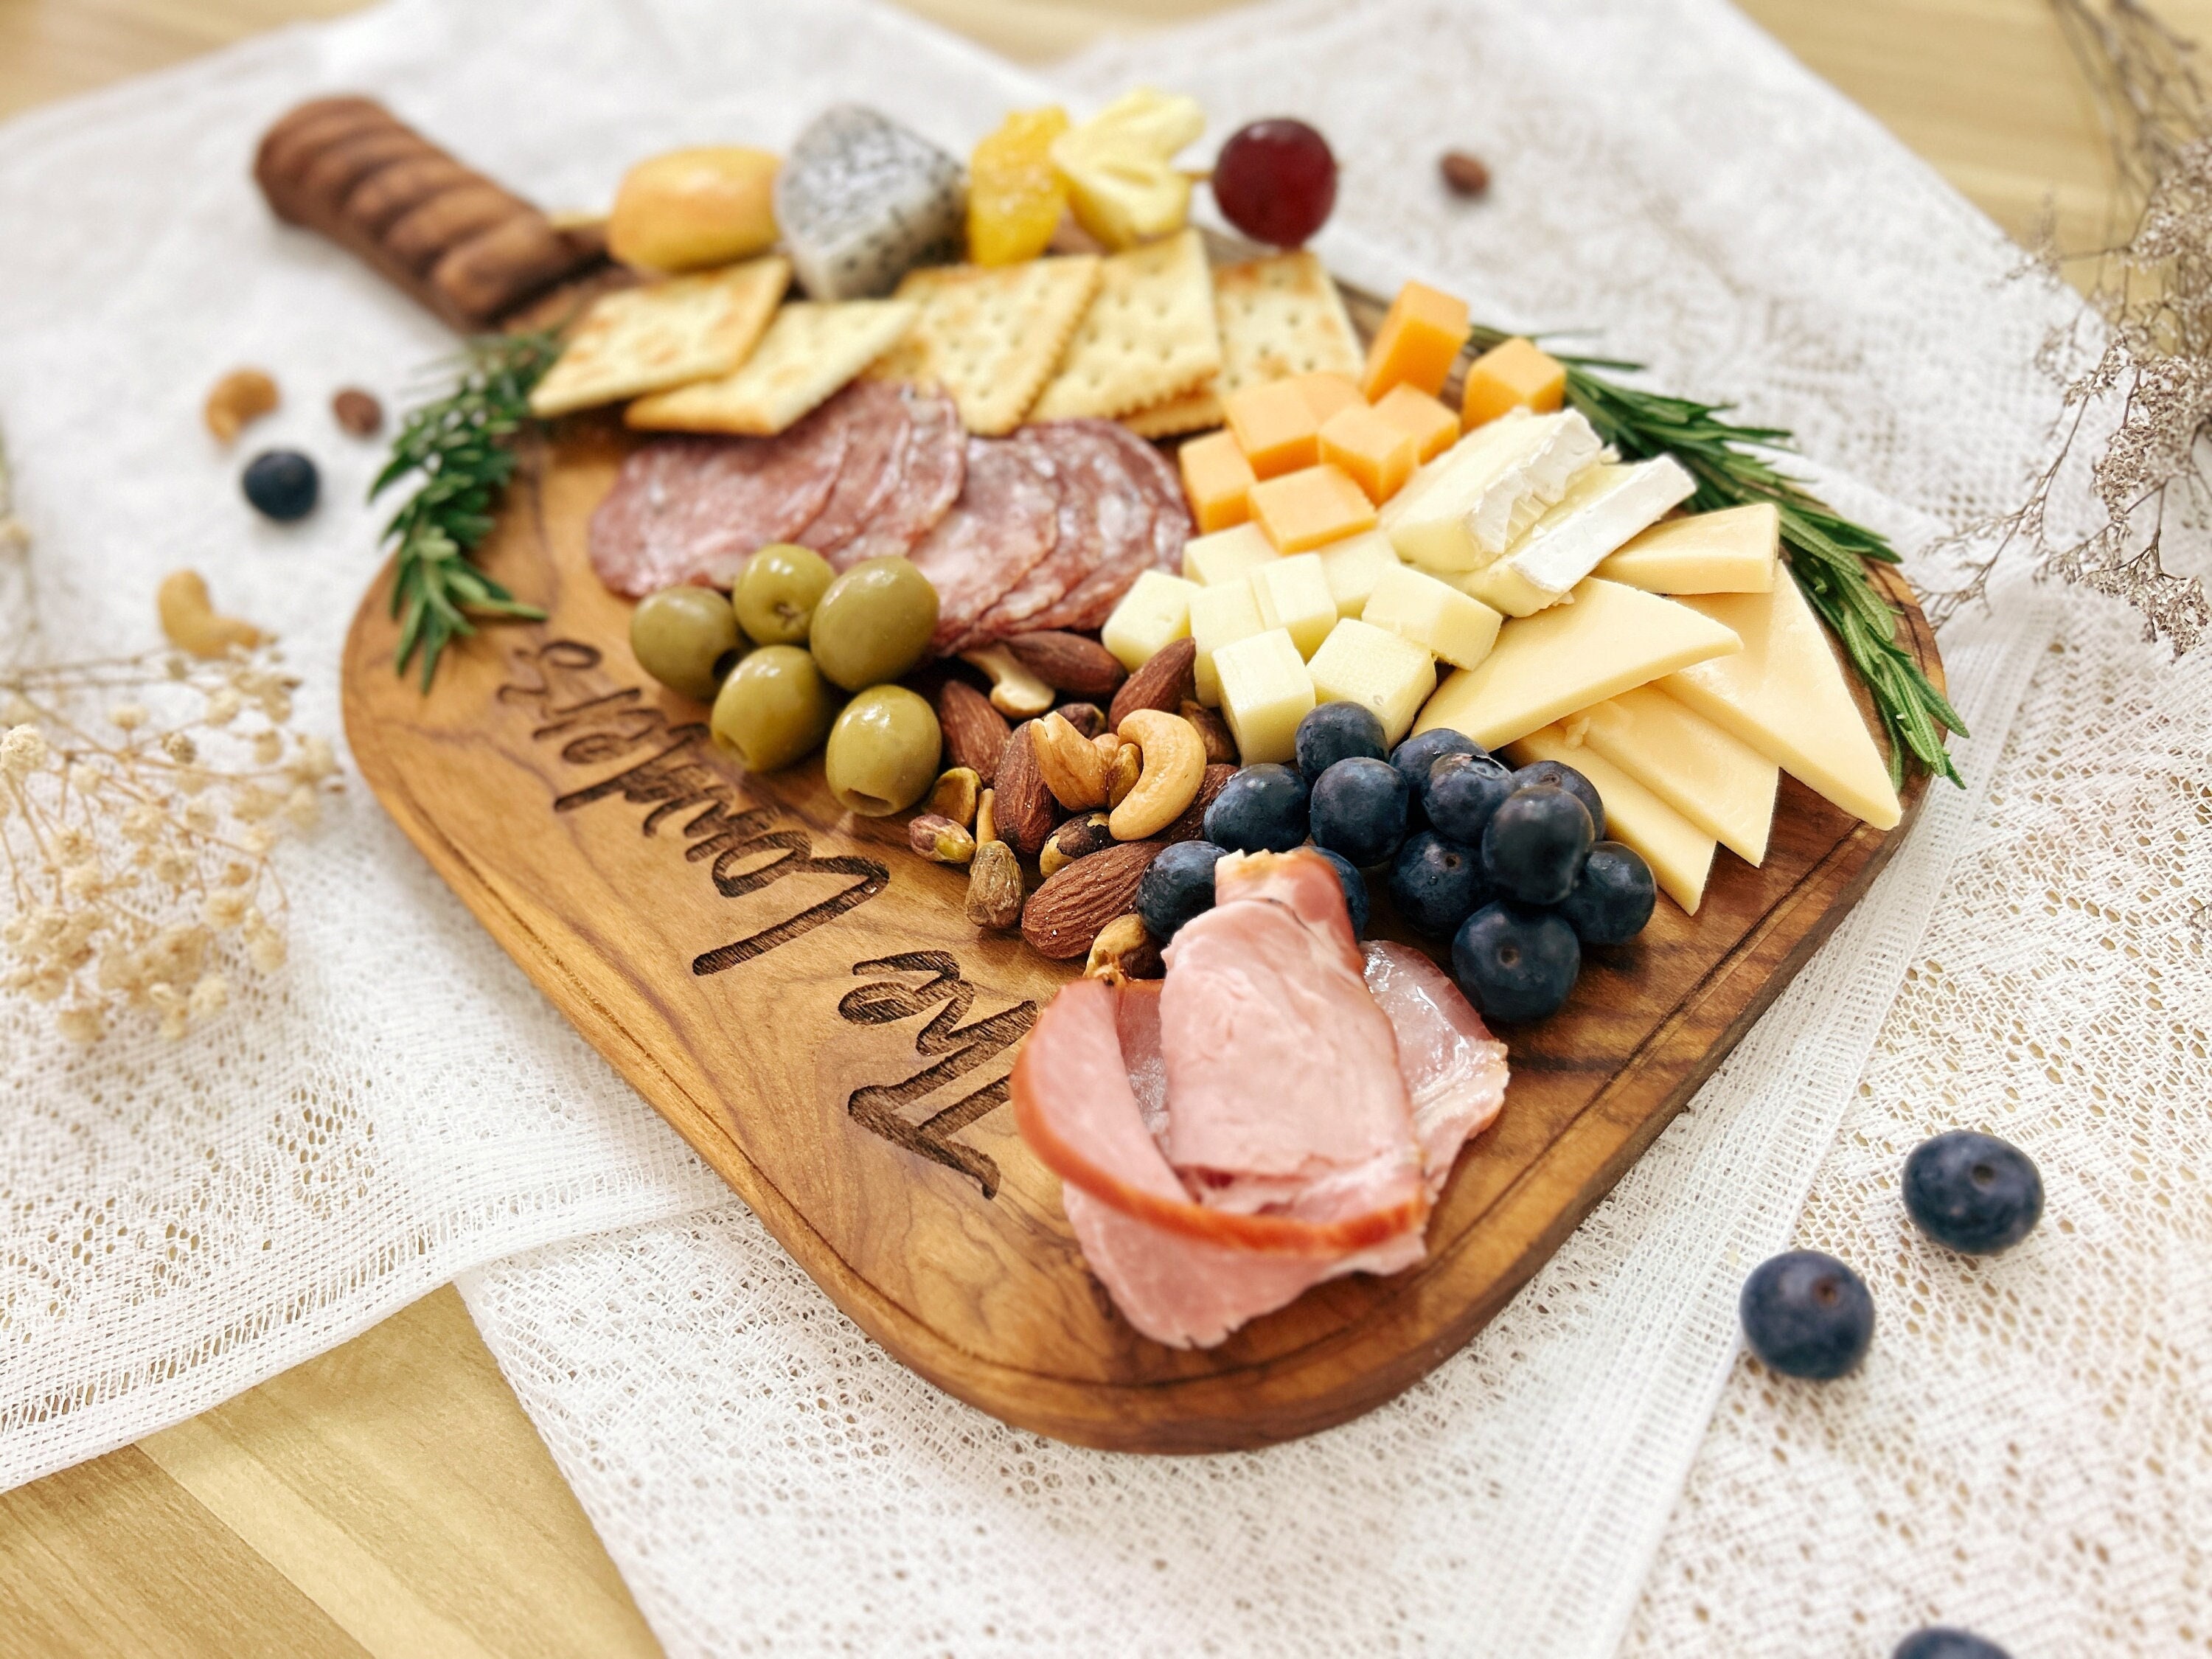 Artisanal Teak Charcuterie, Cutting, Cheese & Bread Board, Handmade,  16x12x1, for Slicing, Dicing & Food Serving